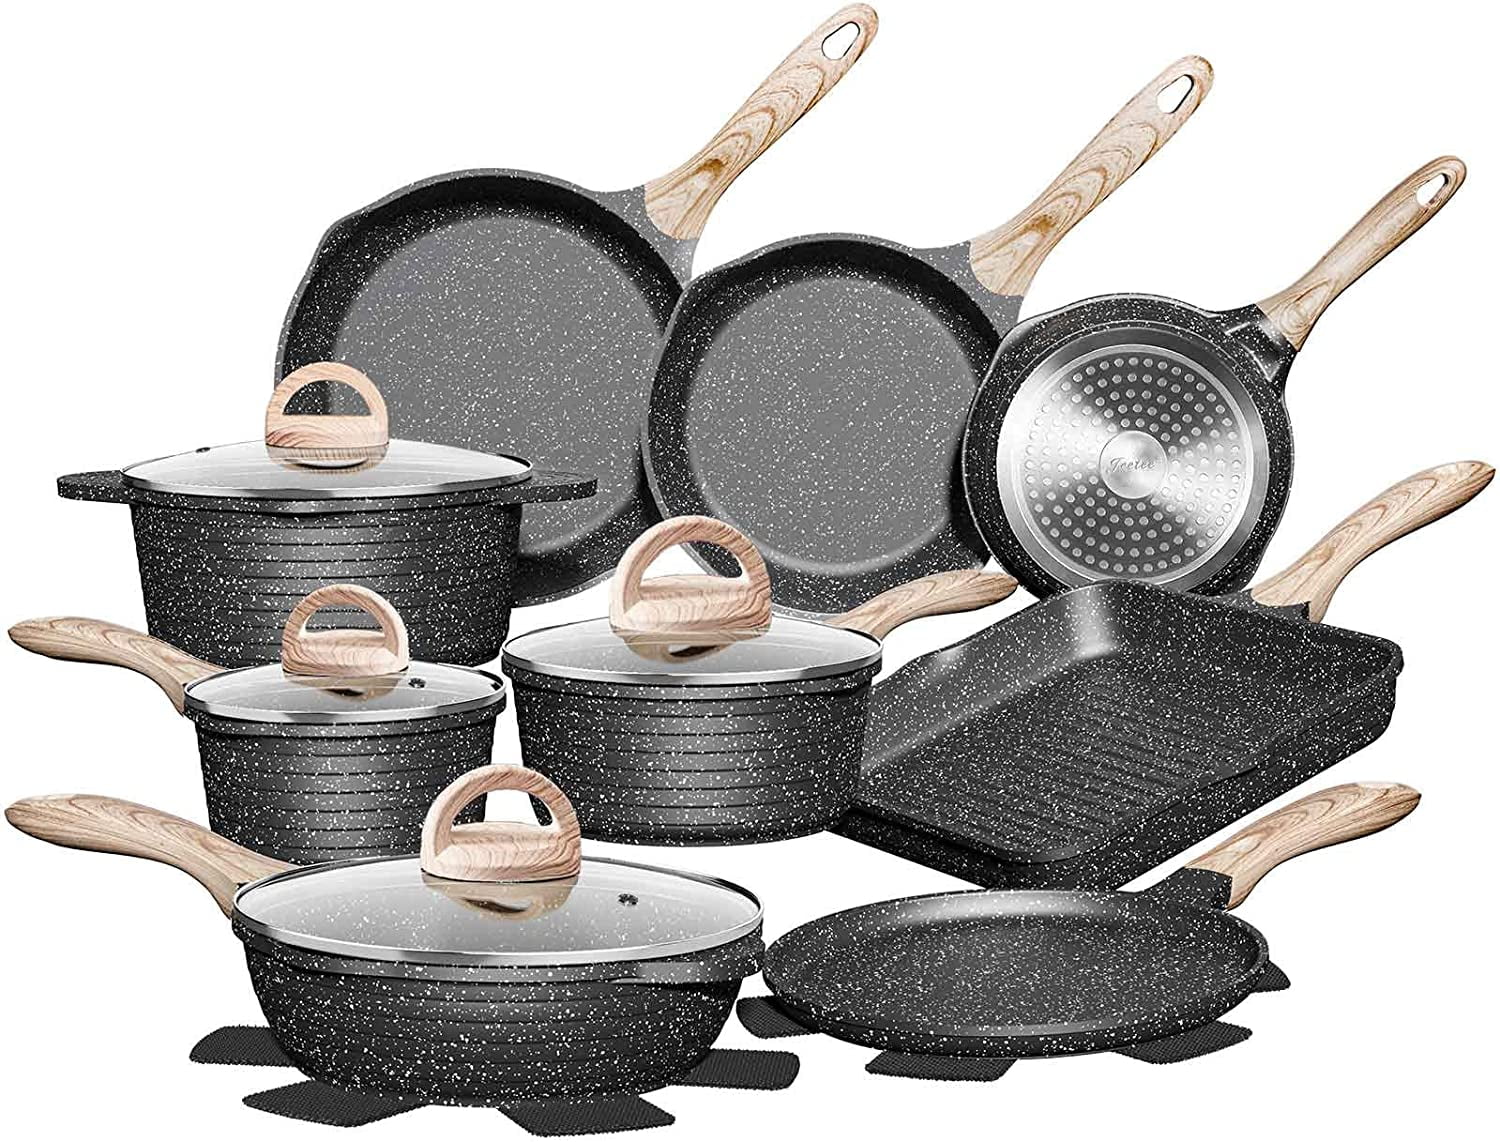  Pots and Pans Set Non Stick – Induction Hob Pot Set with Lids –  15pcs Kitchen Cookware Sets – Cooking Cream Granite Saucepan Pots and Frying  Pans – by Nuovva: Home & Kitchen